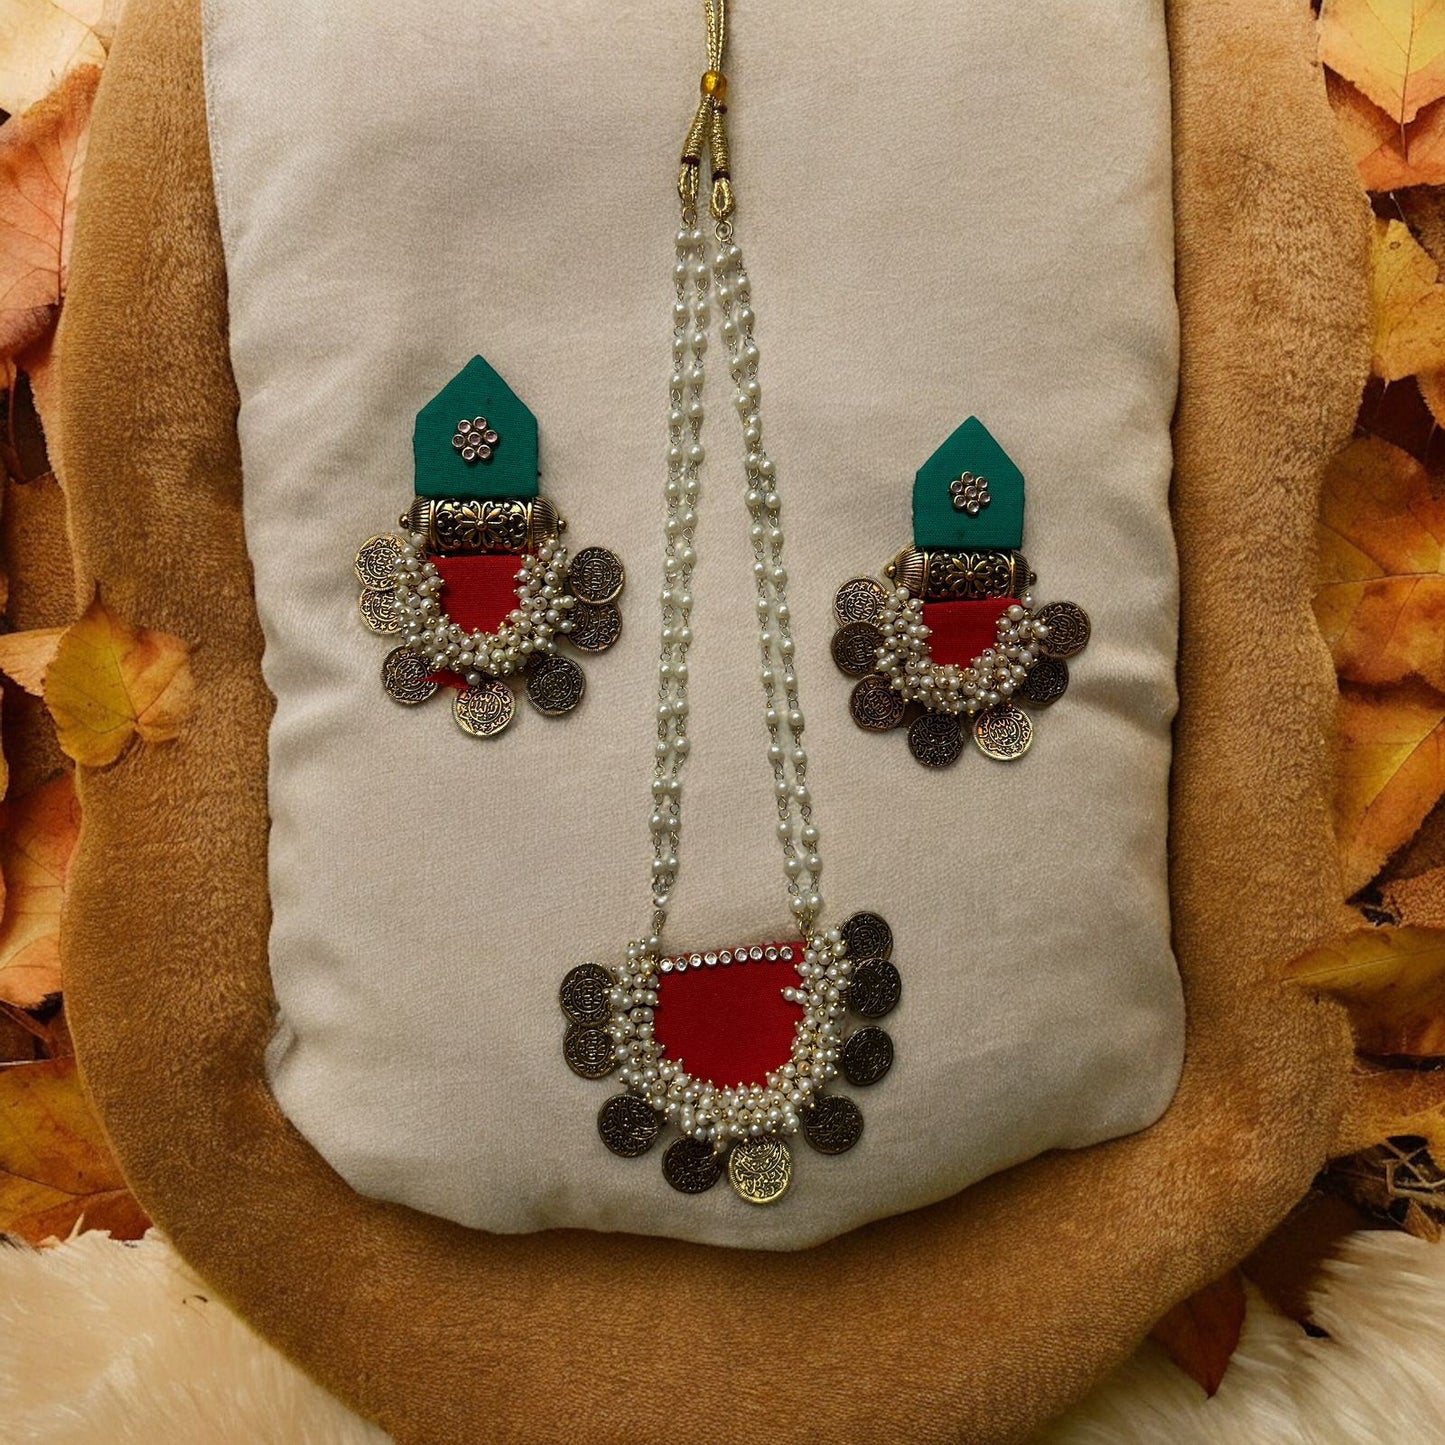 Ethinic jewelry set on fabric with accessories red and green